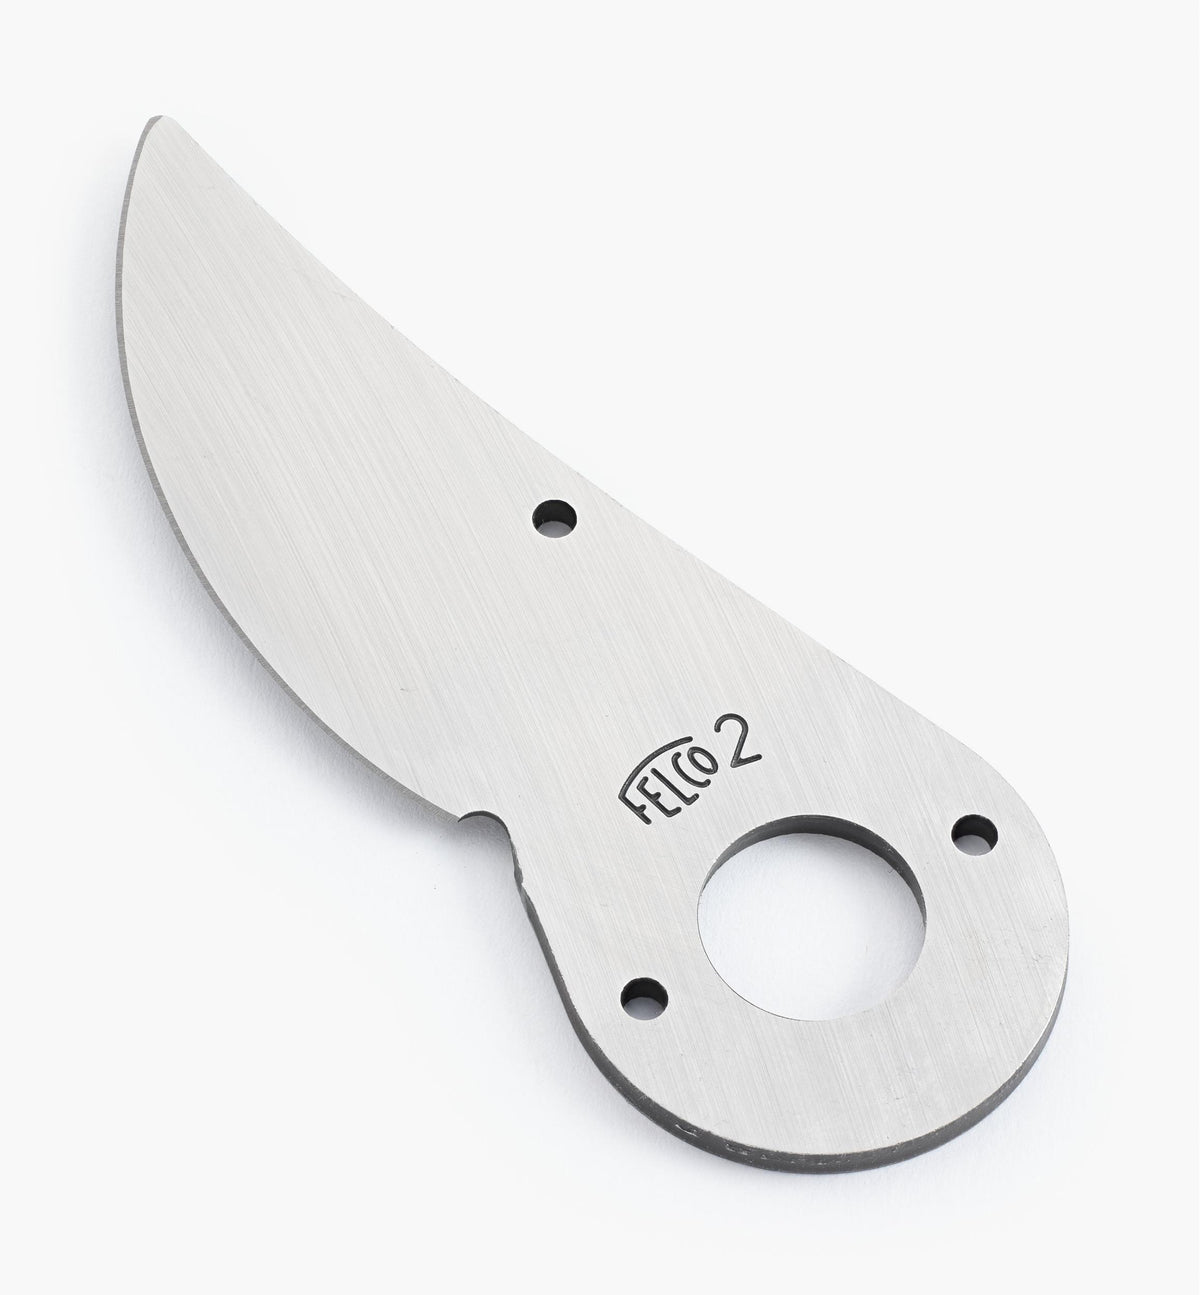 Felco® Replacement Cutting Blade